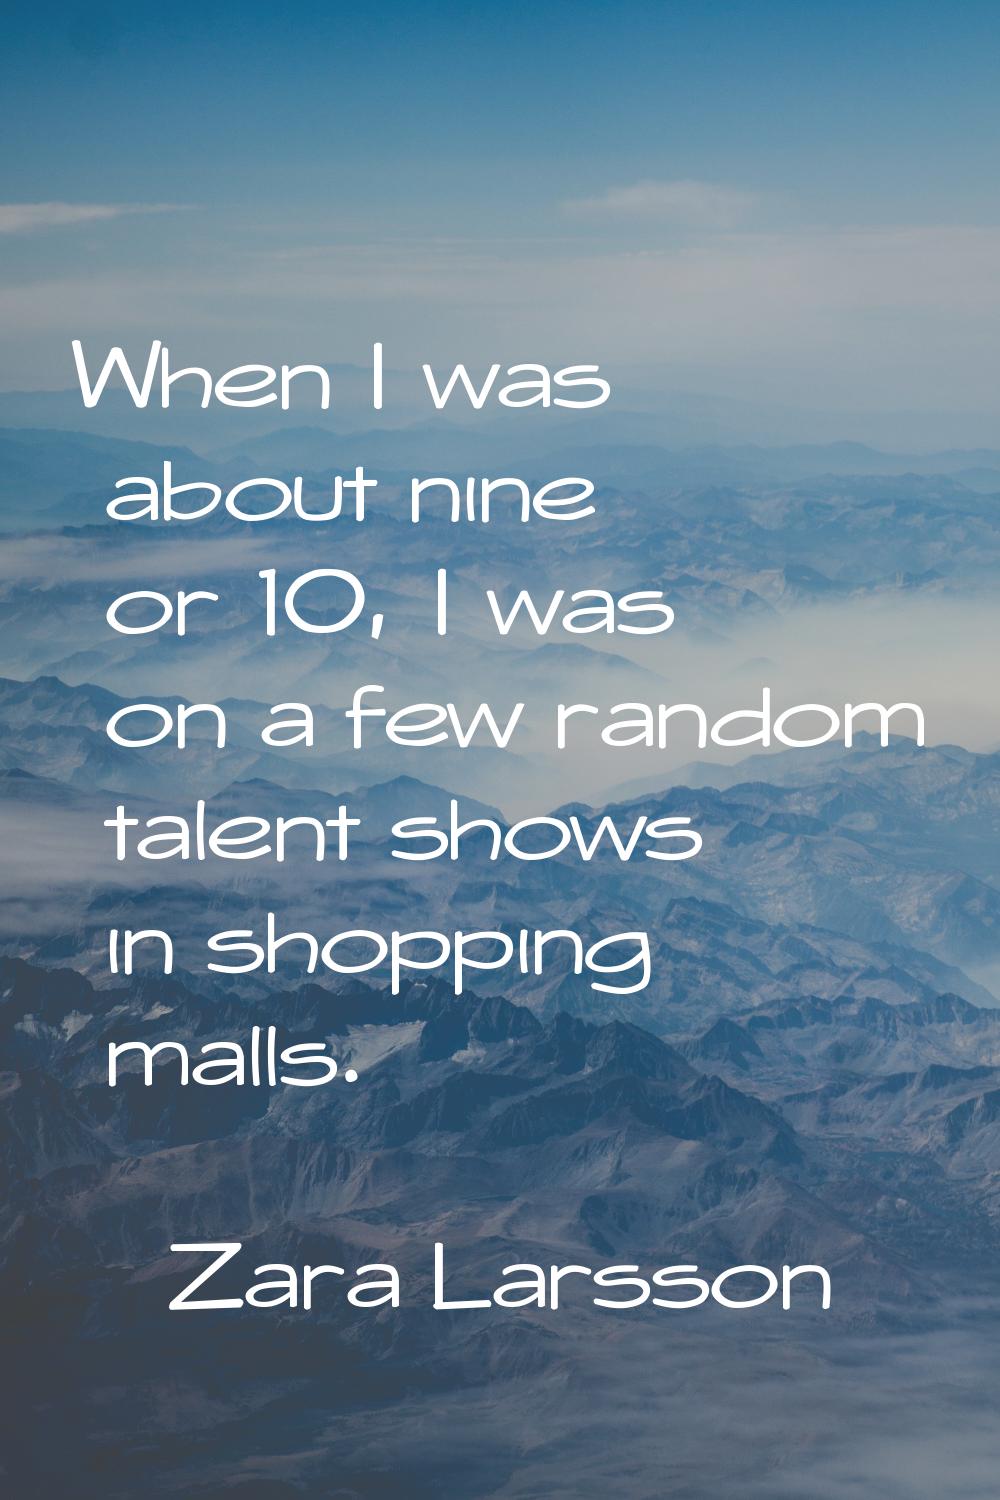 When I was about nine or 10, I was on a few random talent shows in shopping malls.